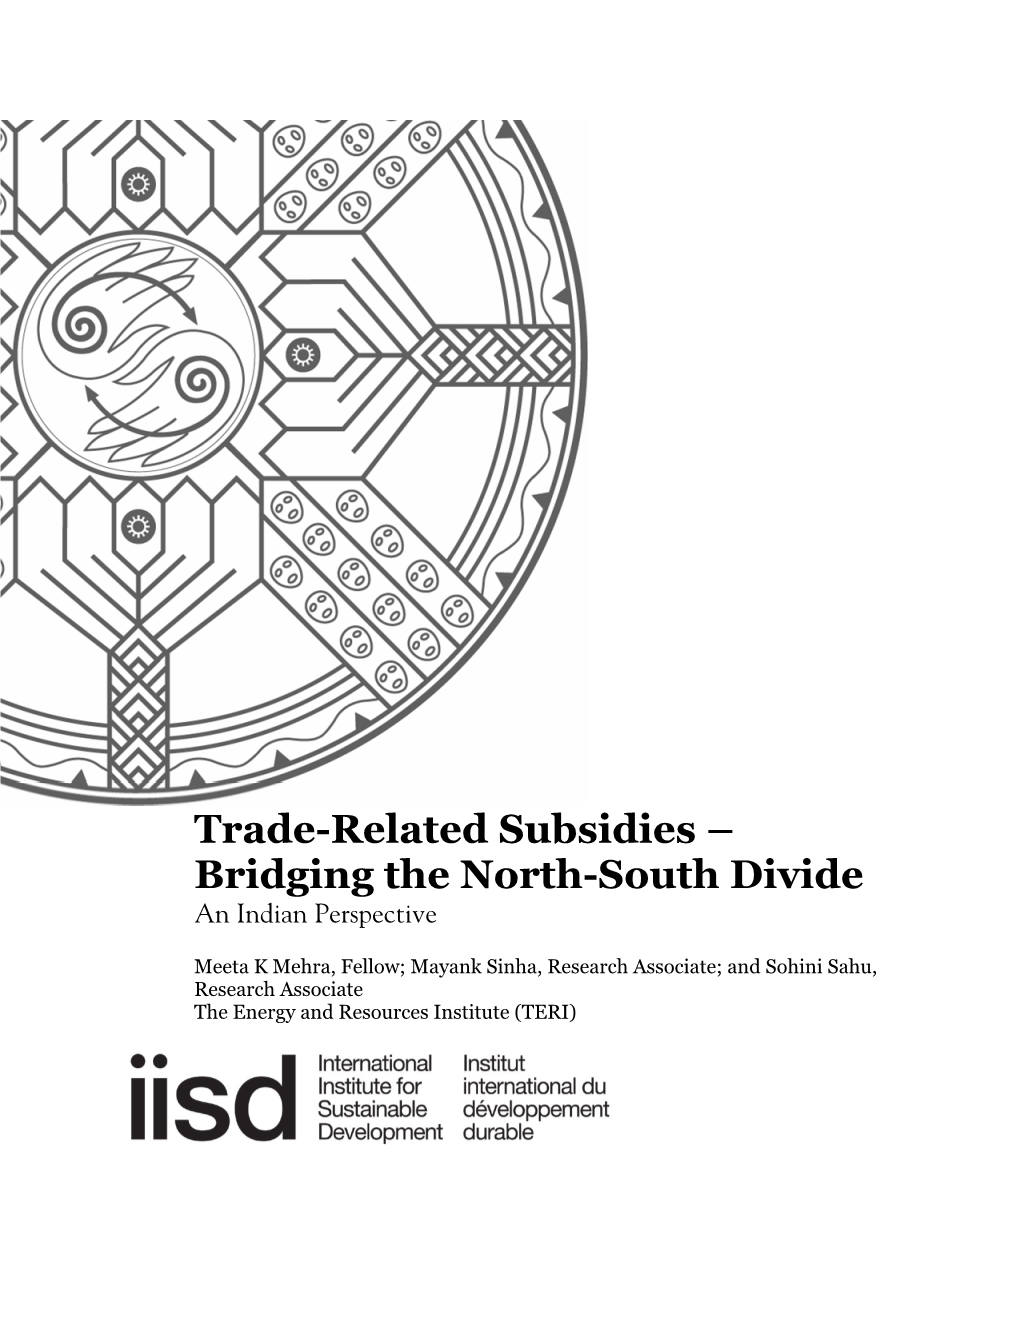 Trade-Related Subsidies – Bridging the North-South Divide an Indian Perspective